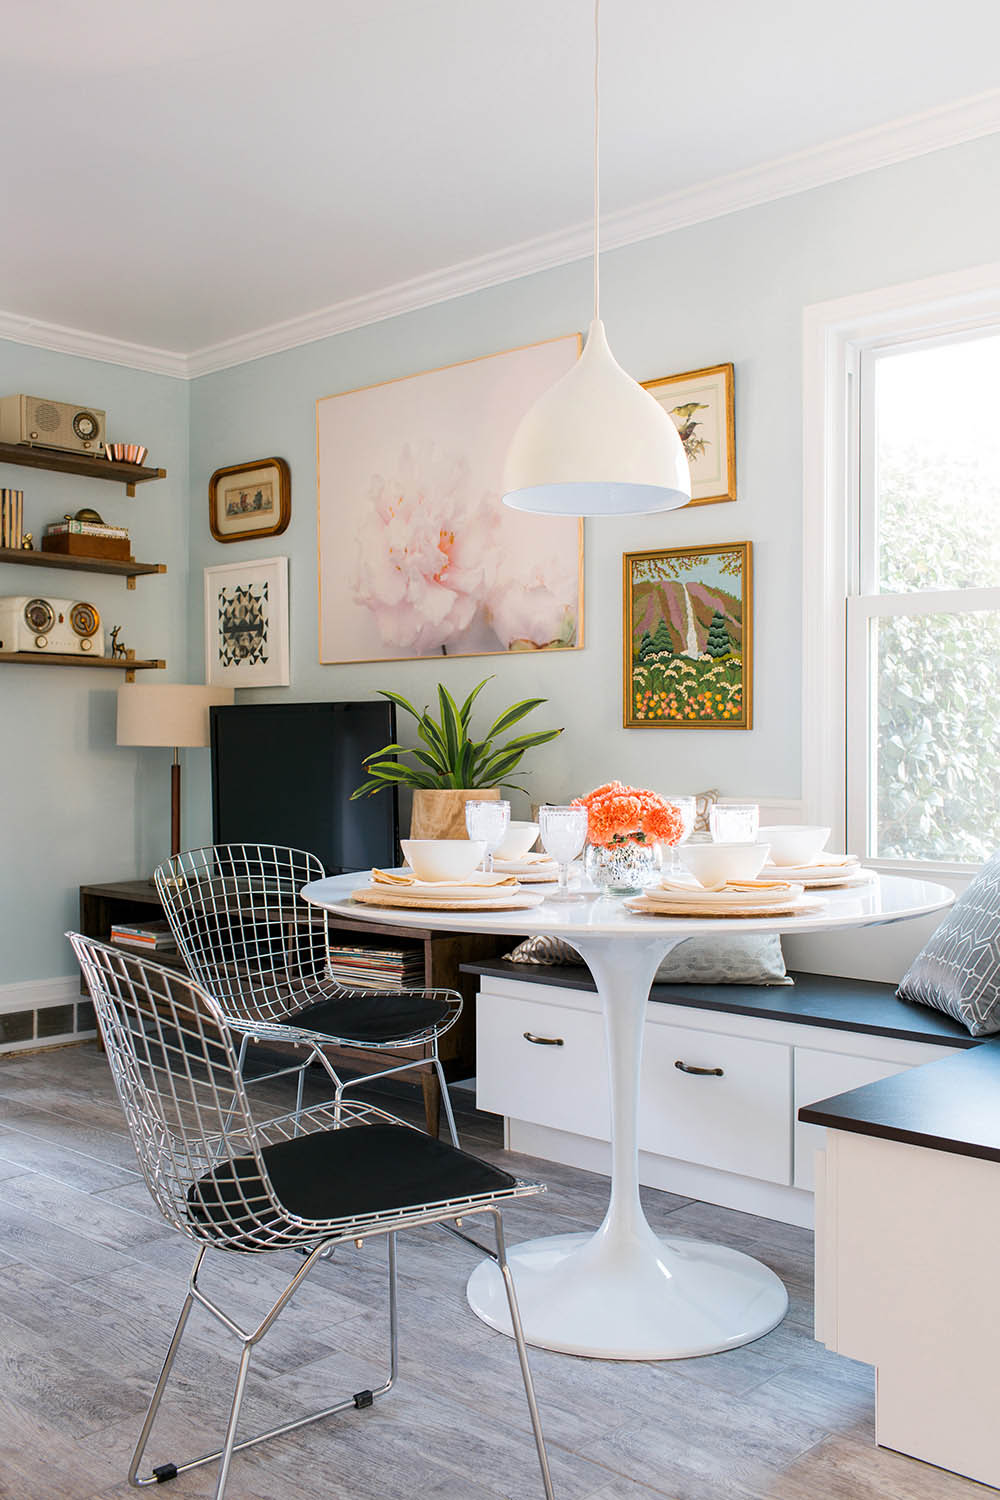 An eating nook with a white table and place settings, two chairs and a bench in a living room space with light blue walls, a television, wall art and lighting.